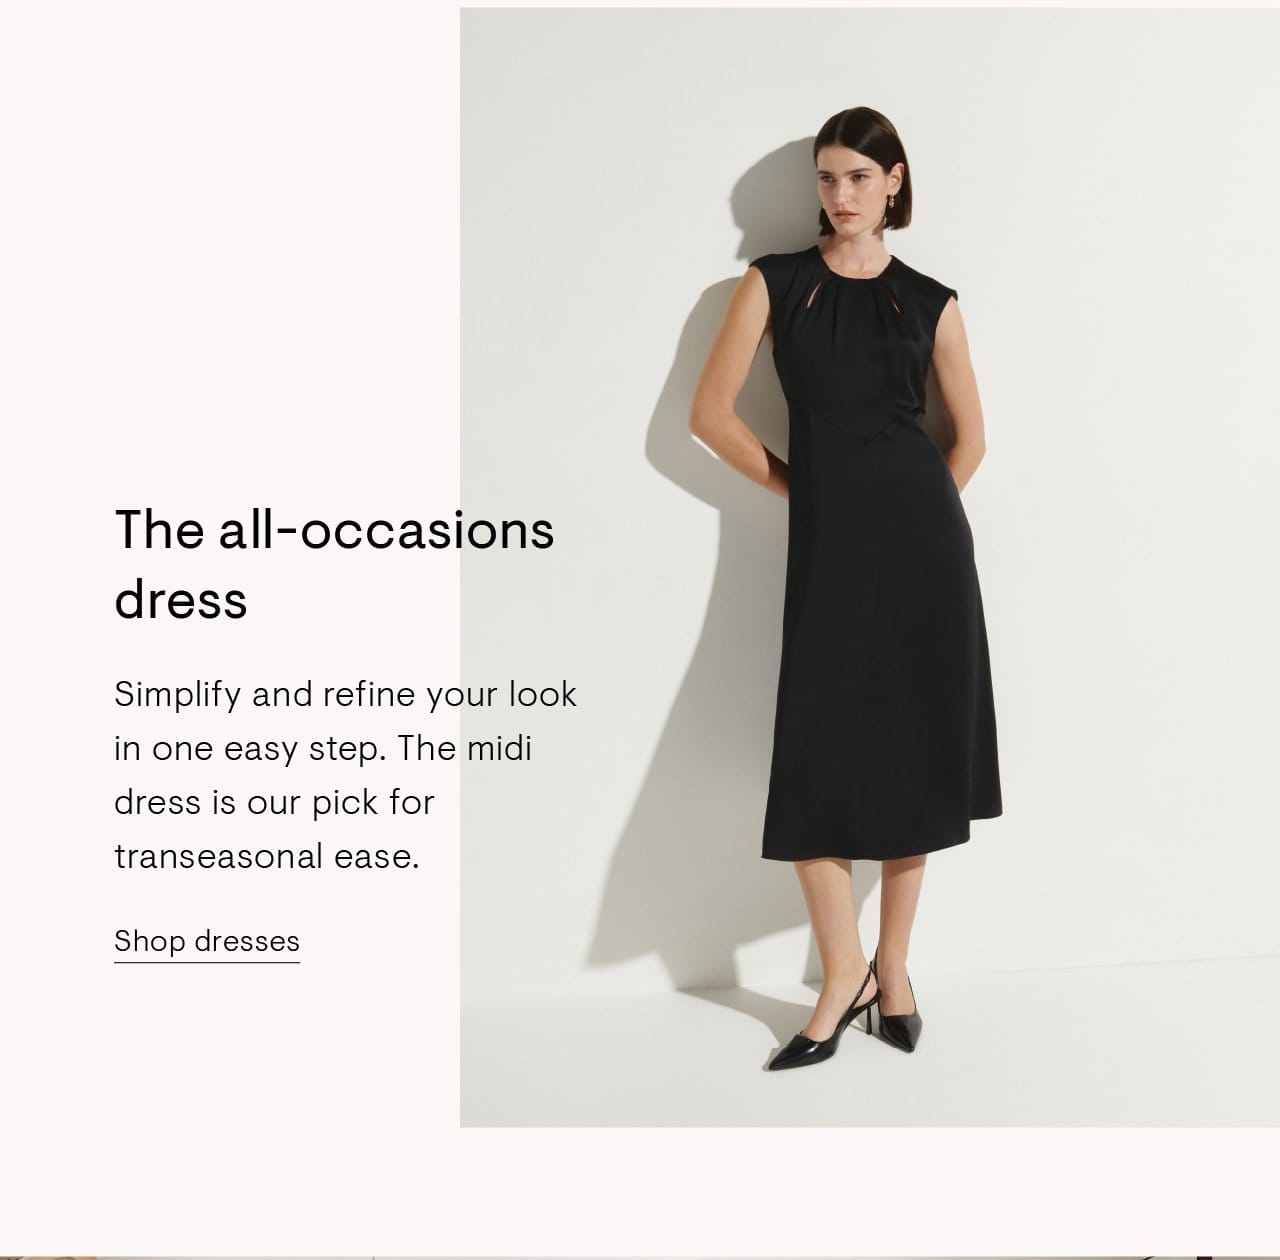 The all-occasions dress